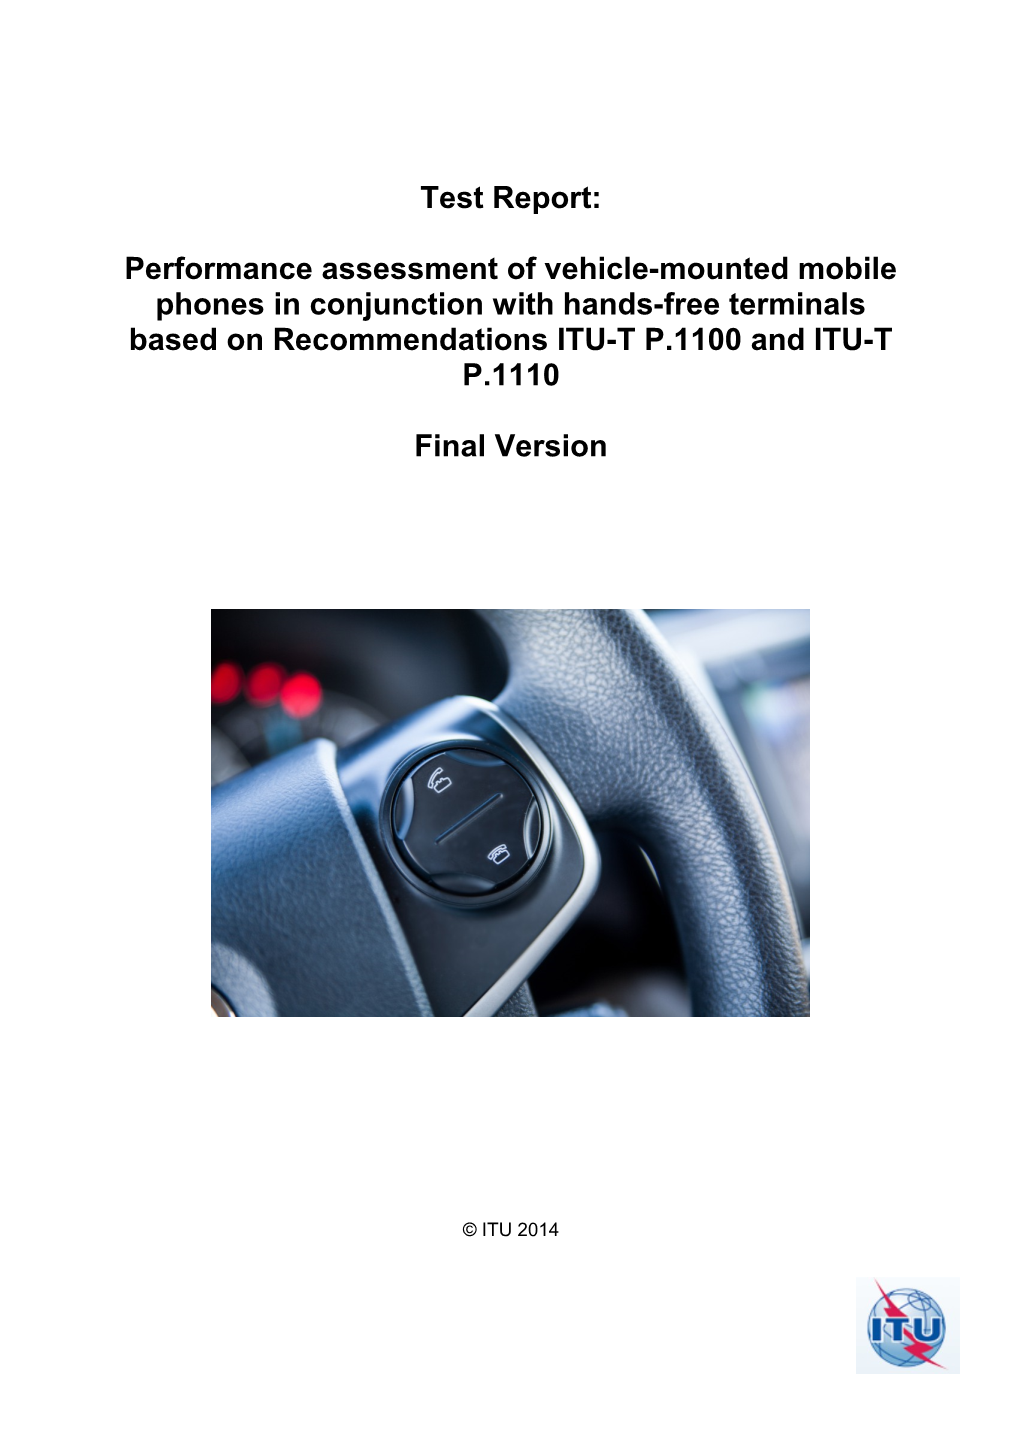 Performance Assessment of Vehicle-Mounted Mobile Phones in Conjunction with Hands-Free